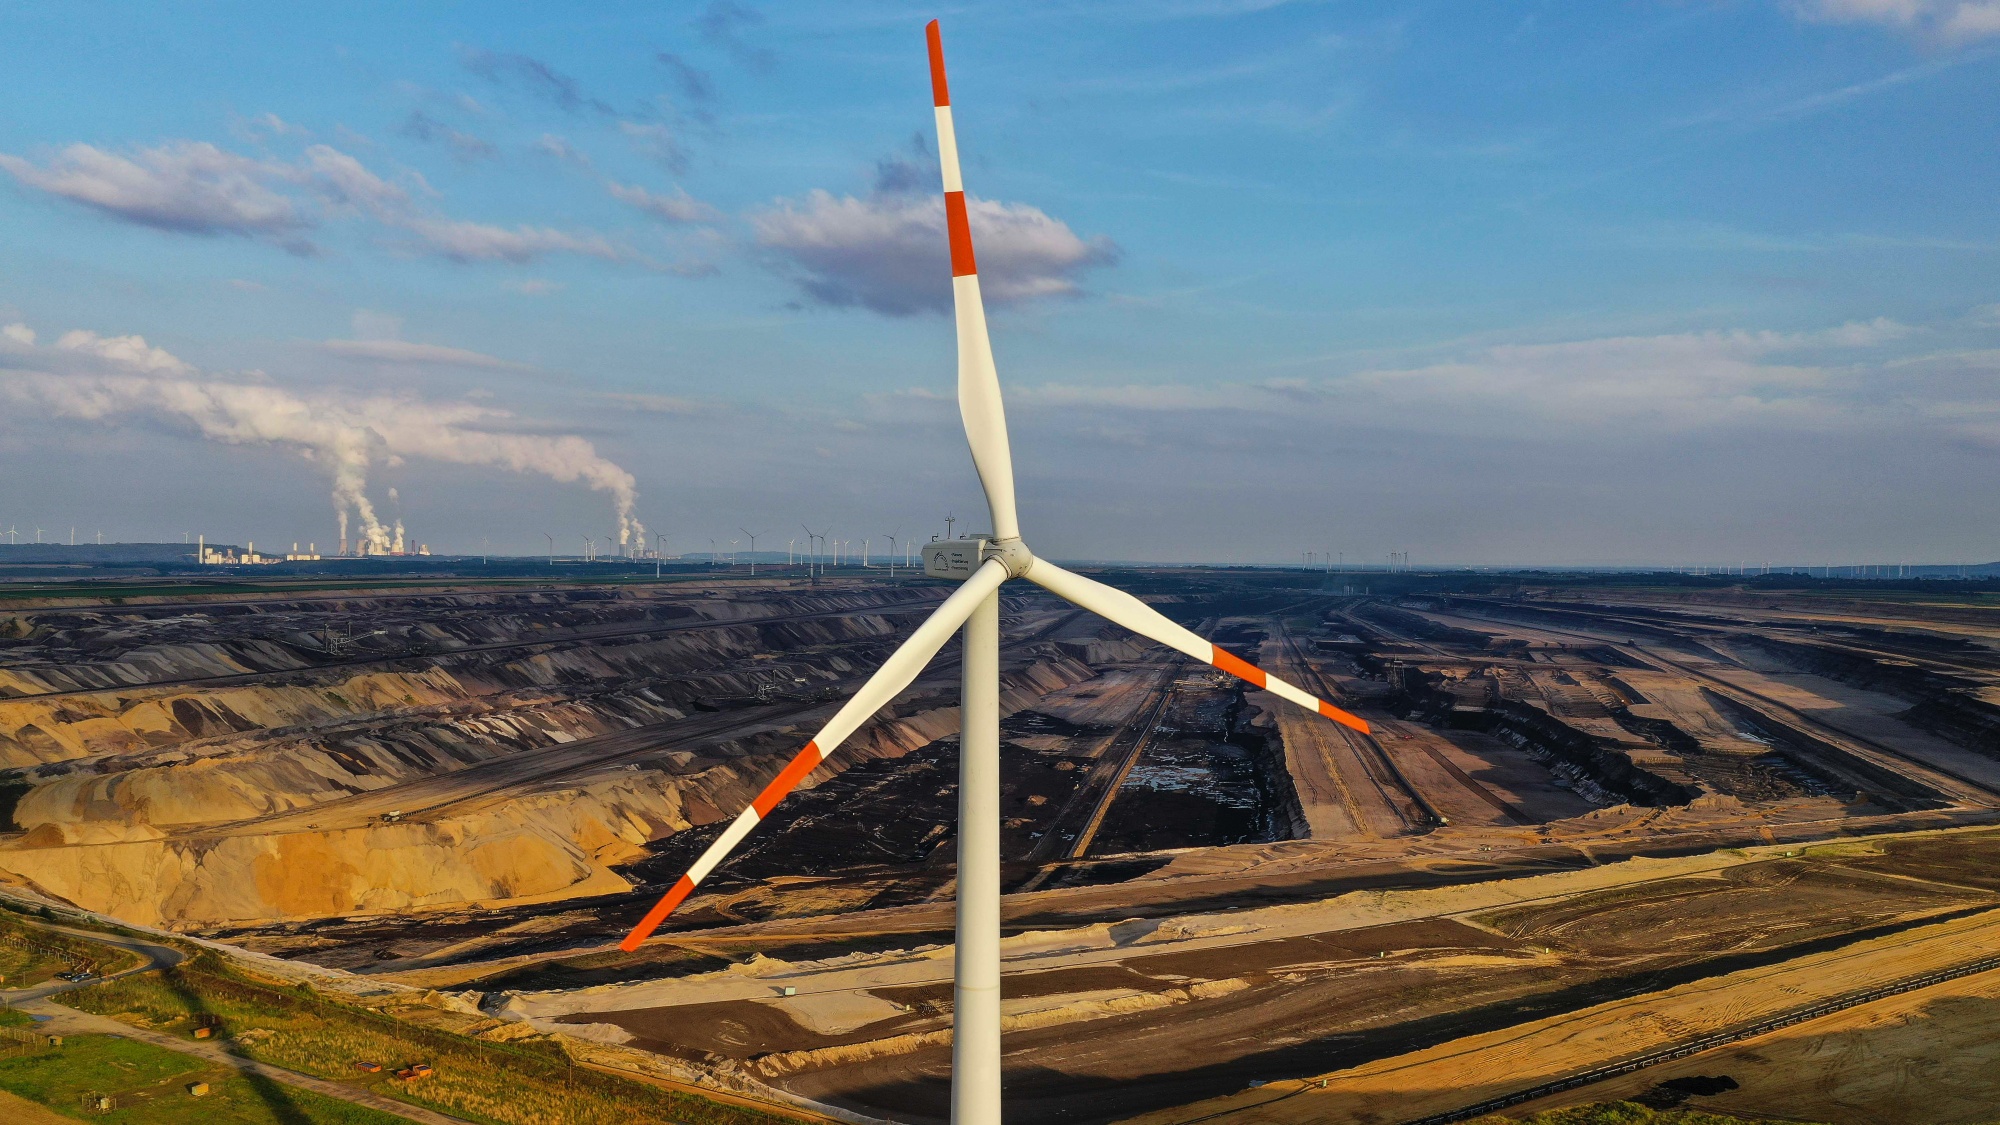 RWE AG Lignite Mine and Windfarm As Climate Scientists Call For Rapid End of Fossil Fuels 